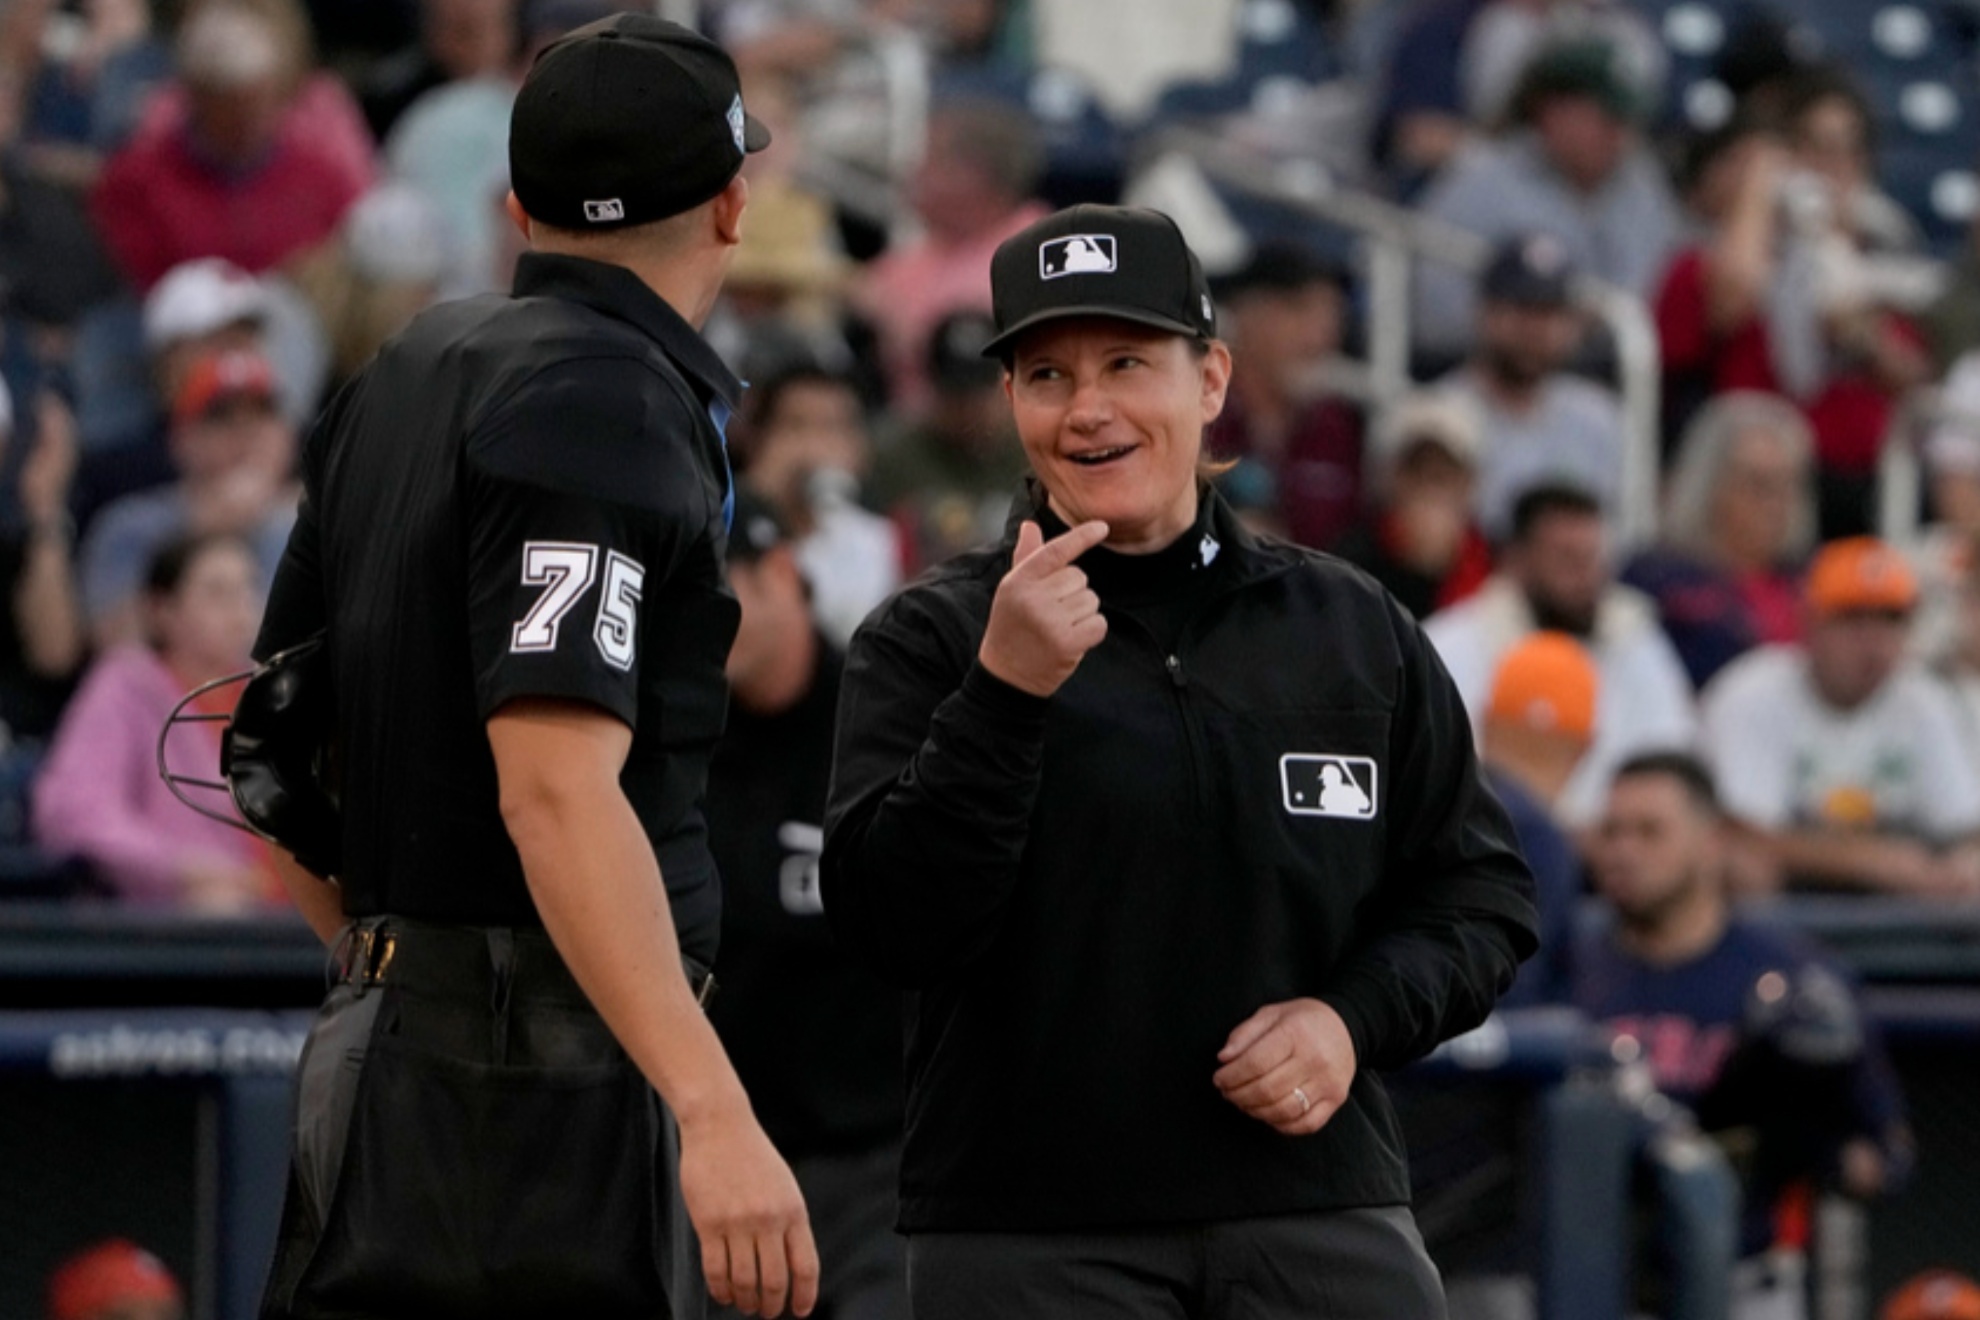 Jen Pawol became the first female umpire to work an MLB Spring Training game in 17 years